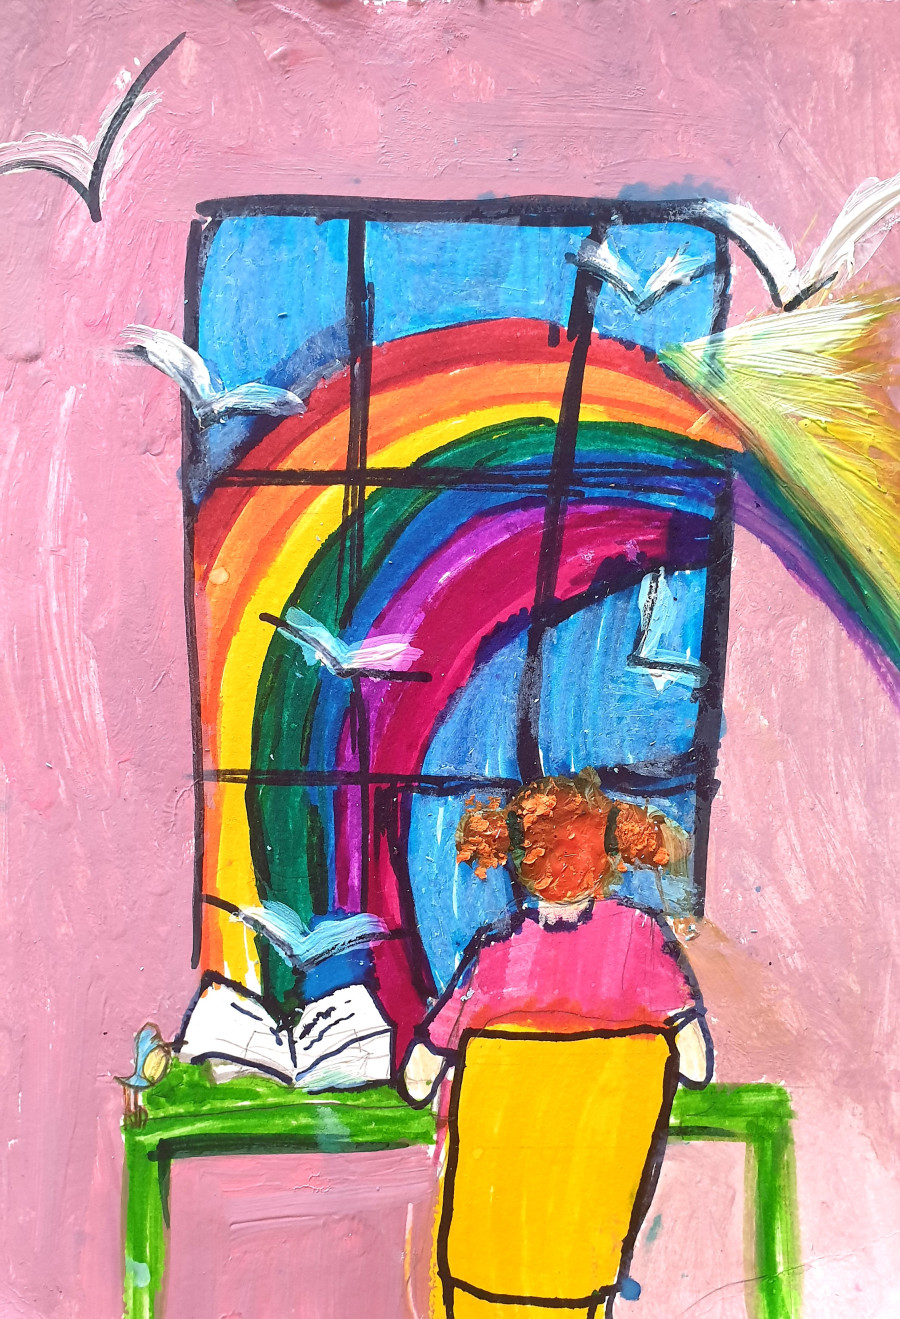 'New day, new light, new flight.' by Lila-May (7) from Meath